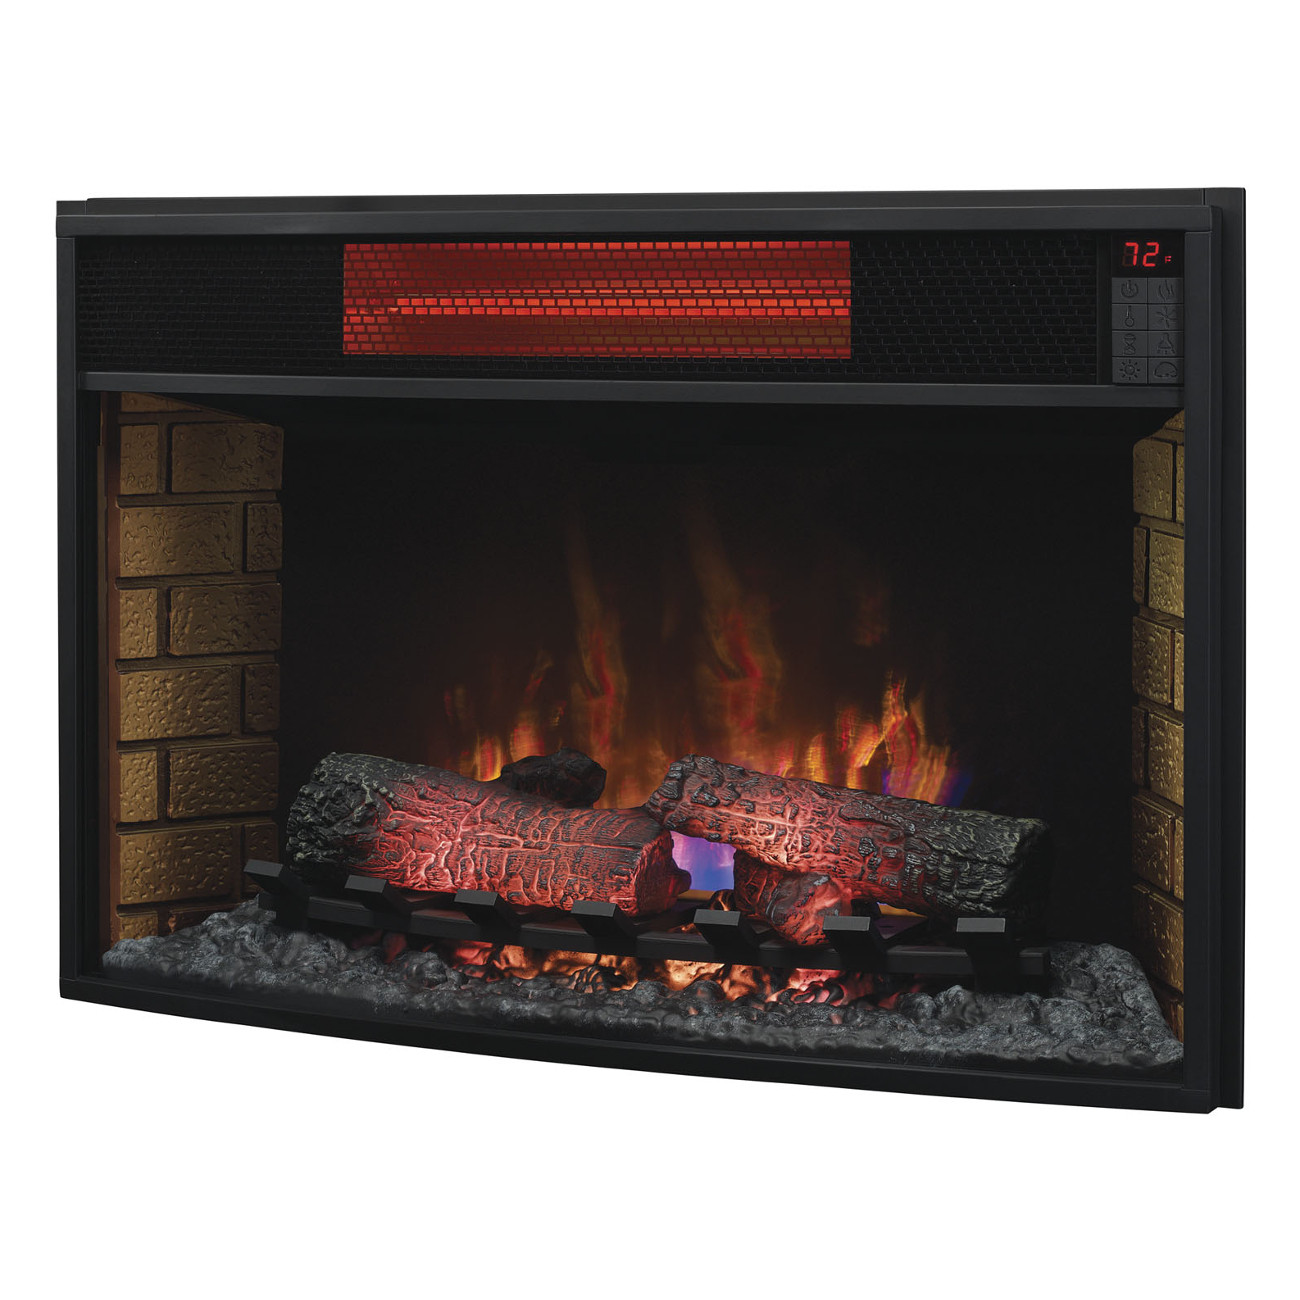 Electric Fireplace Inserts For Sale
 Electric Fireplaces Your 1 source for electric